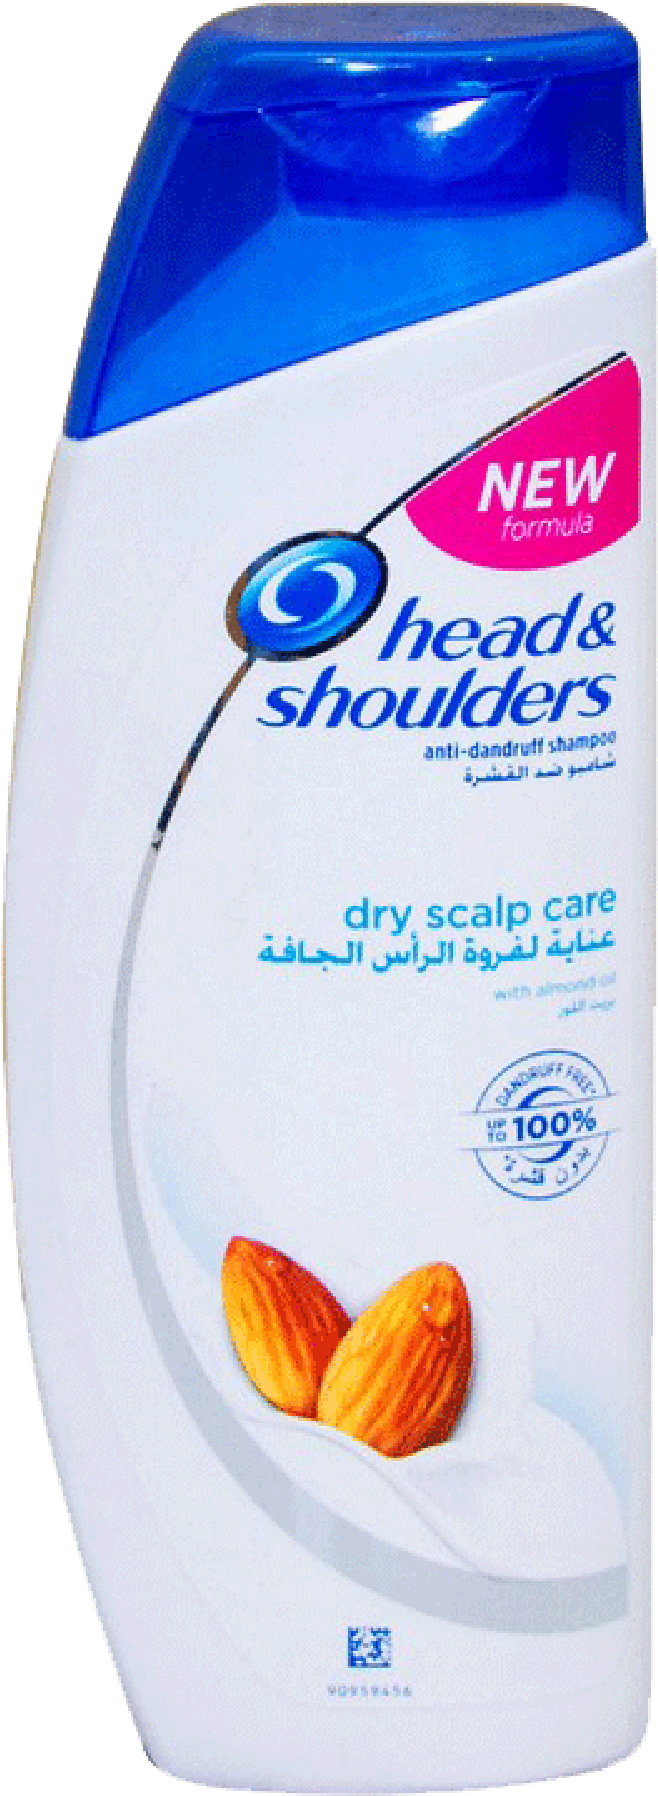 Headand Shoulders Dry Scalp Care Shampoo Bottle PNG image